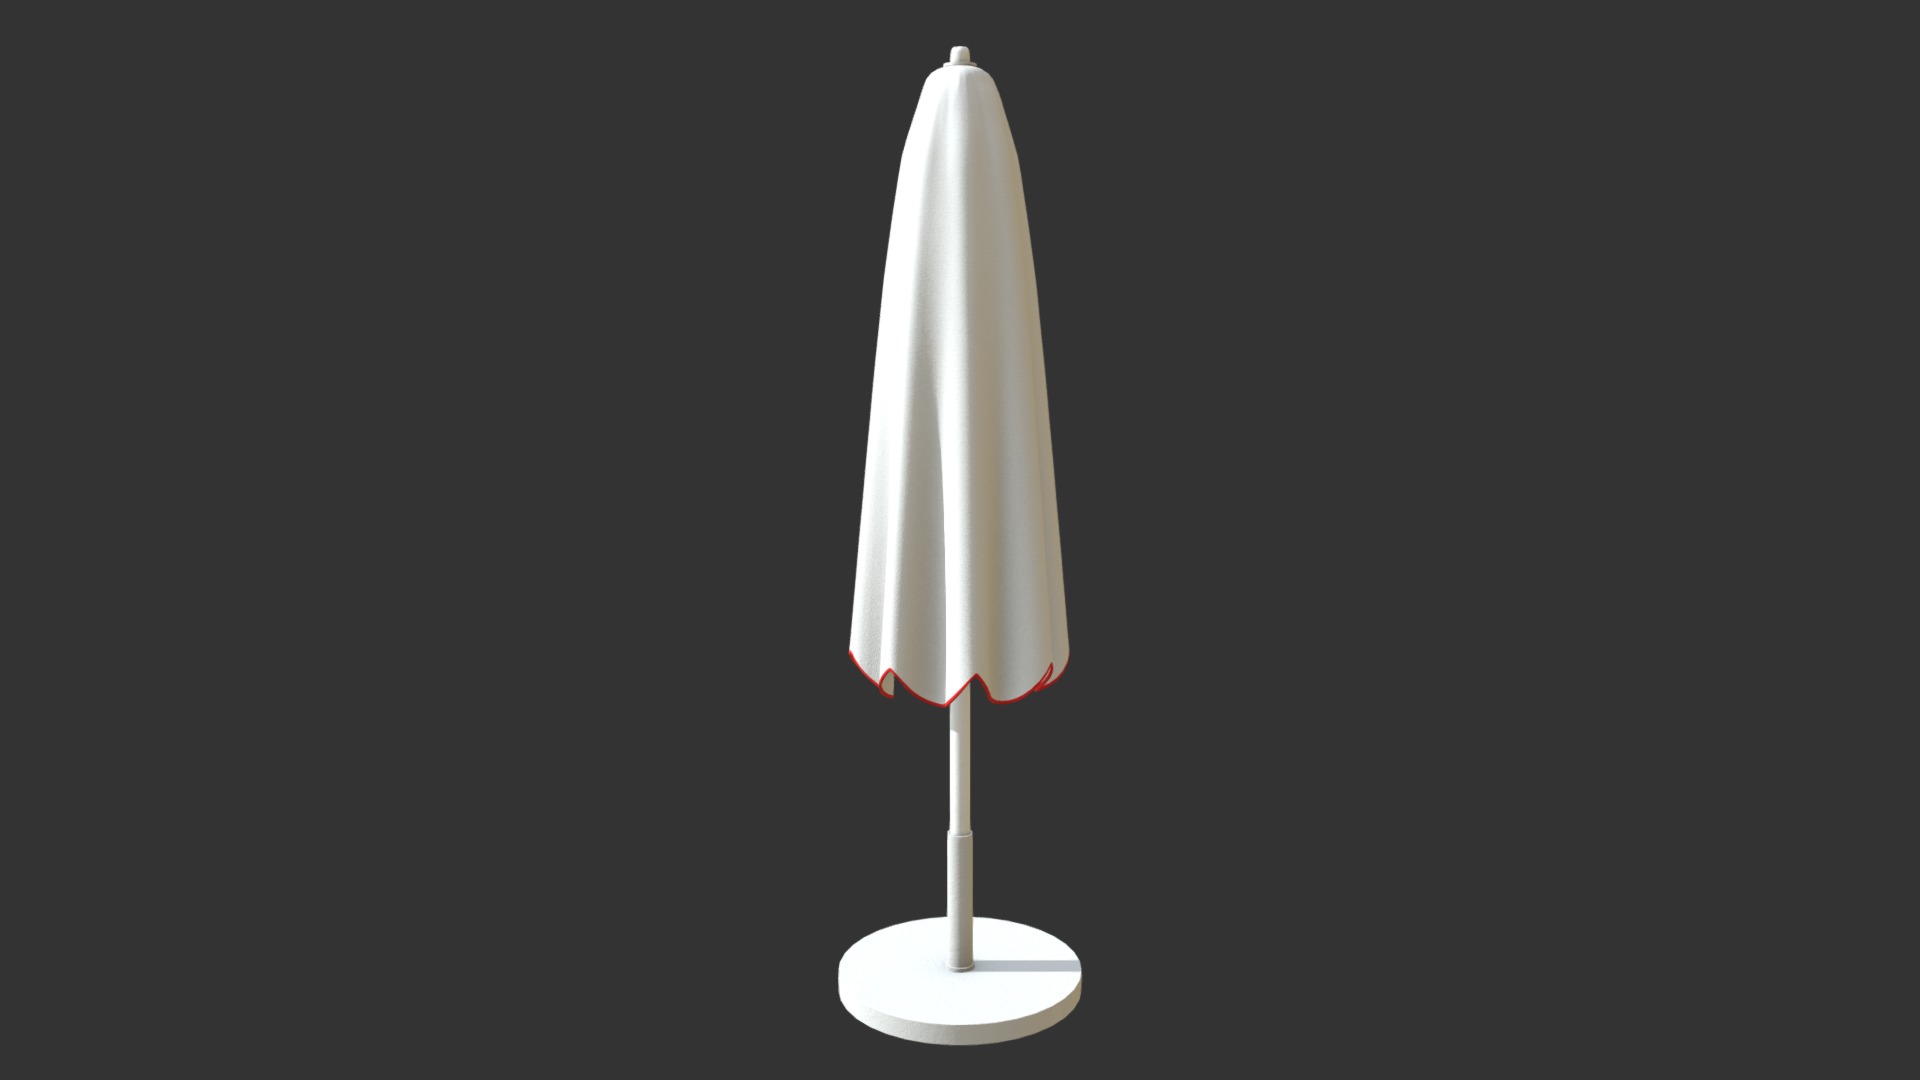 3D model Closed beach umbrella 1 - This is a 3D model of the Closed beach umbrella 1. The 3D model is about a white lamp with a black background.